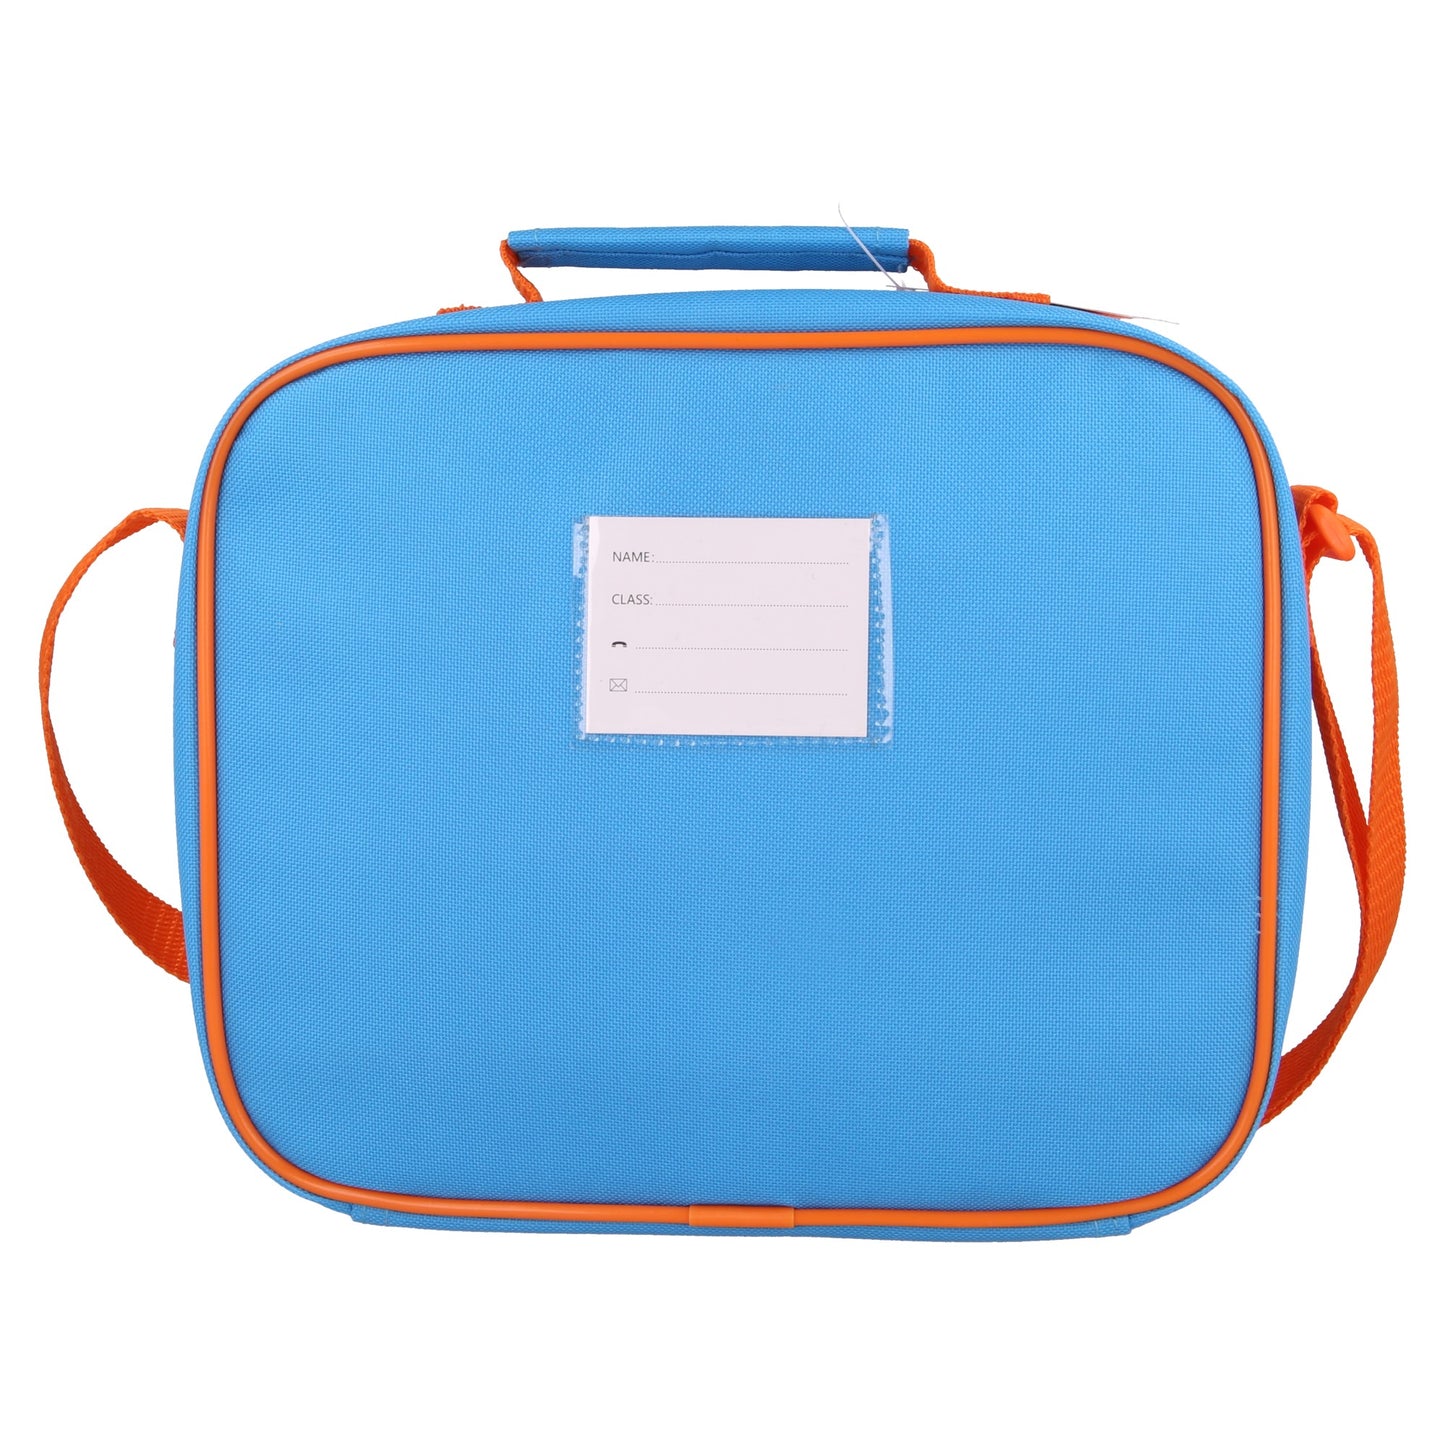 Stor - Insulated Lunch Bag, With Strap | MICKEY COOL SUMMER